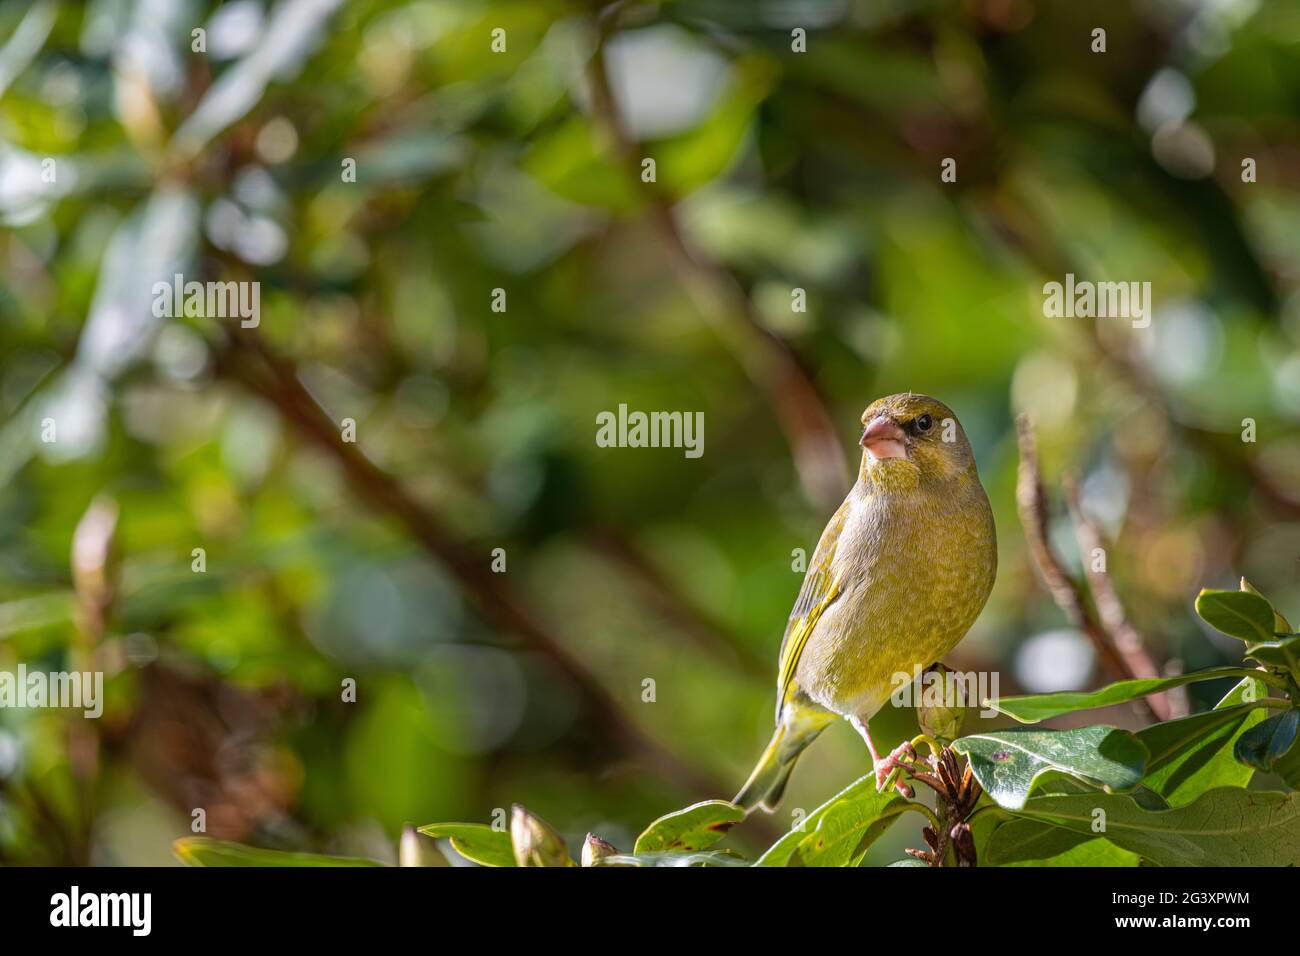 Green finch with blurred background Stock Photo